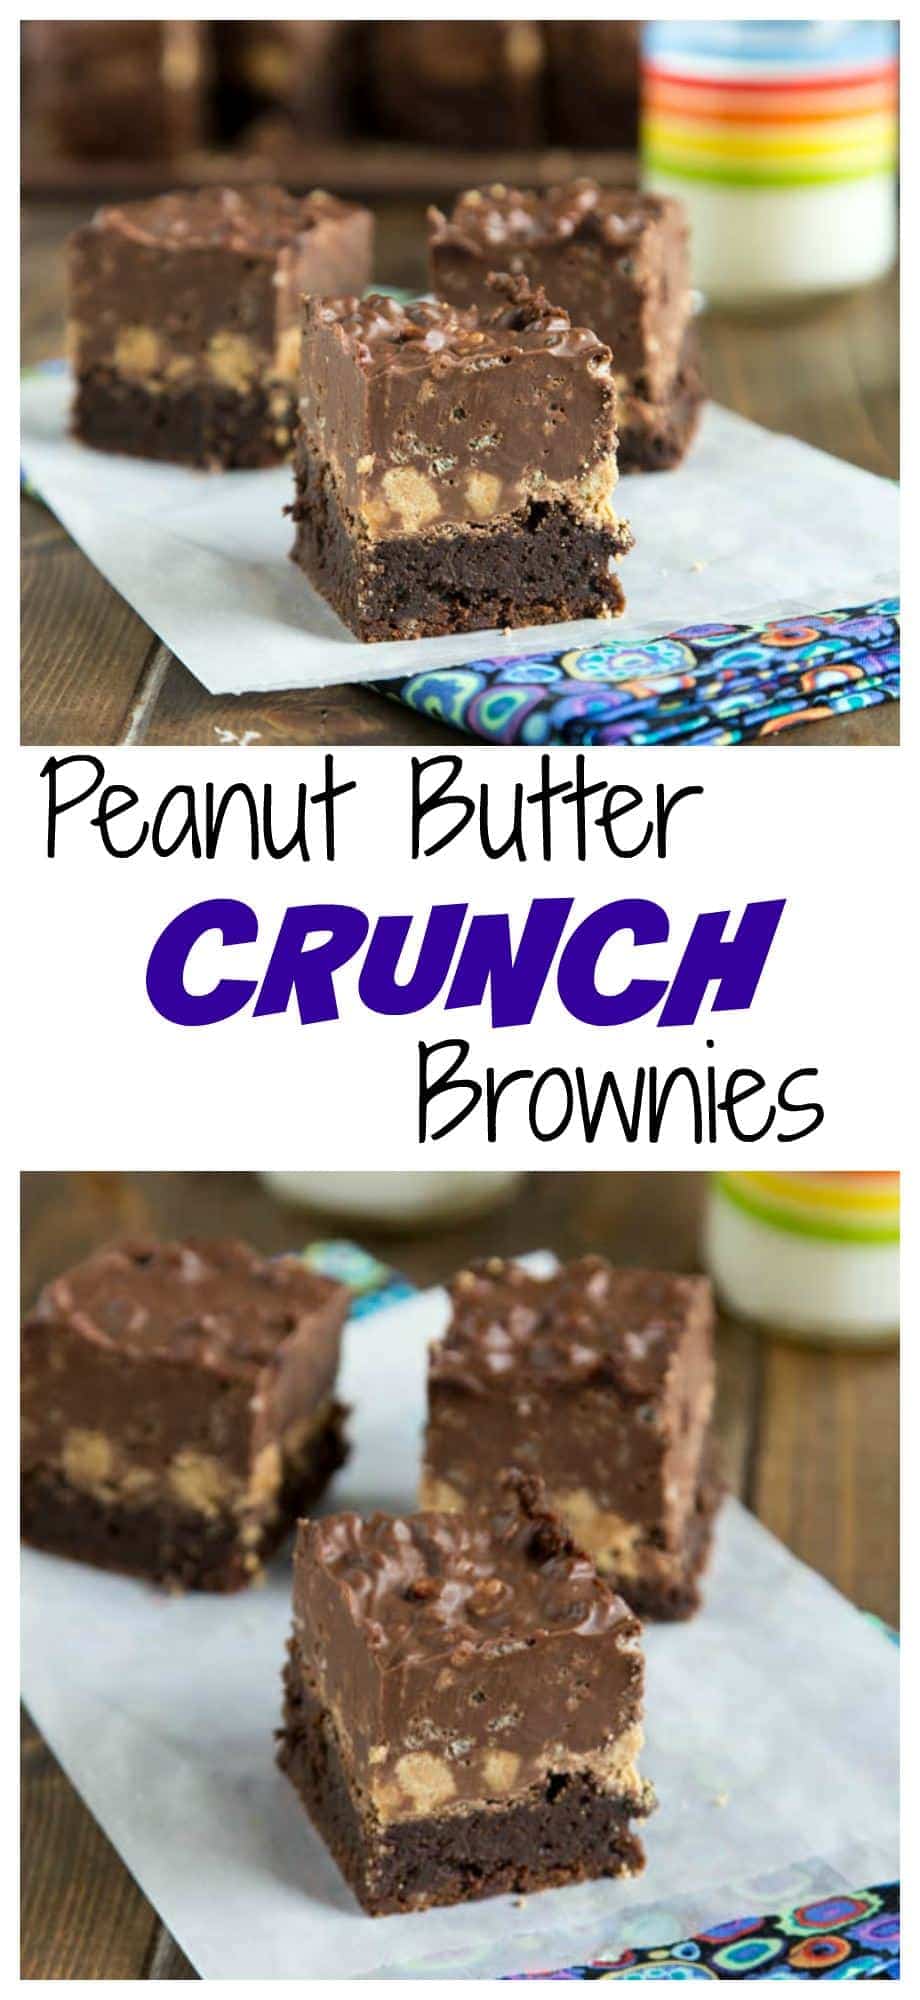 Peanut Butter Crunch Brownies - A fudgy brownie, topped with a layer of peanut butter cups, and then a layer of chocolate/peanut butter crispy fudge.  Pure chocolate and peanut butter heaven!